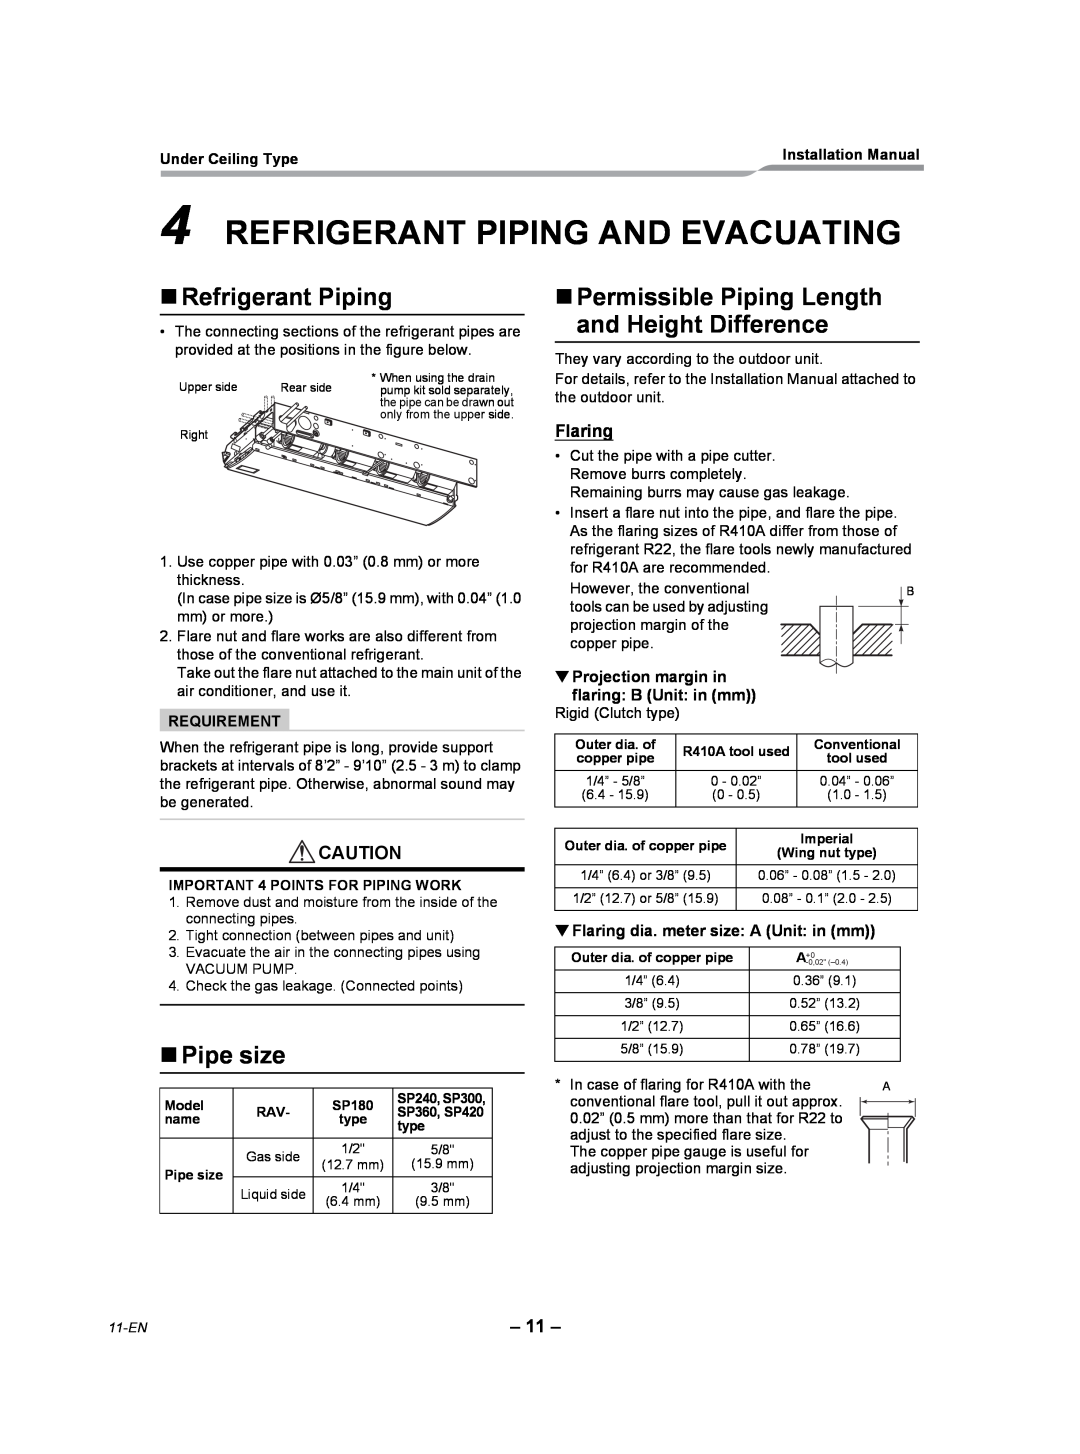 Toshiba RAV-SP180CT-UL Refrigerant Piping And Evacuating, „Refrigerant Piping, „Pipe size, Flaring, Under Ceiling Type 